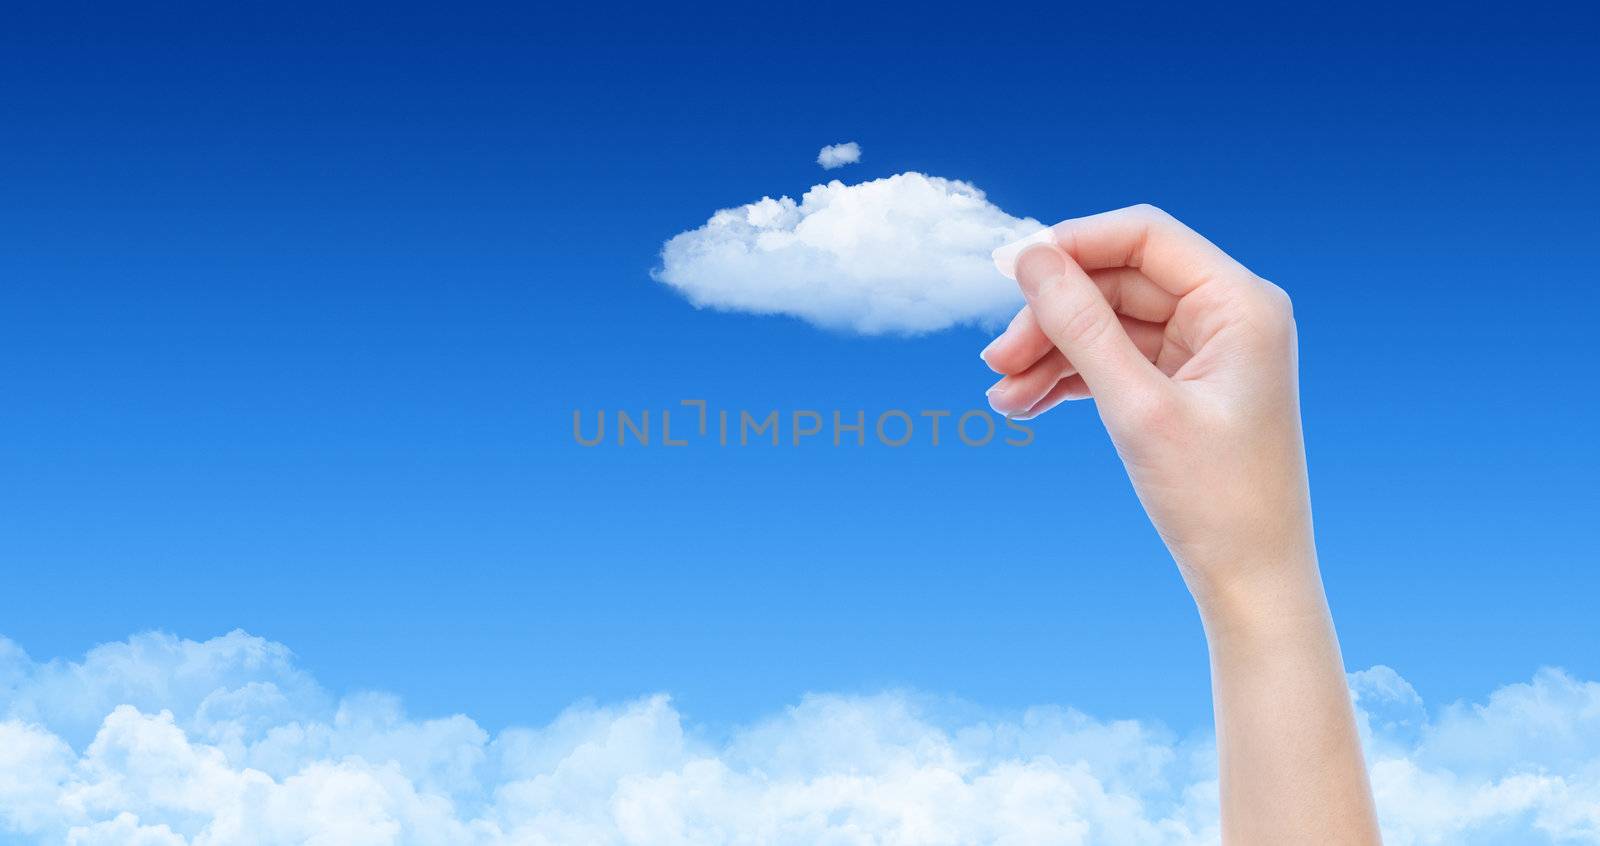 Woman hand hold the cloud against blue sky with clouds. Concept image on cloud computing and eco theme with copy space.